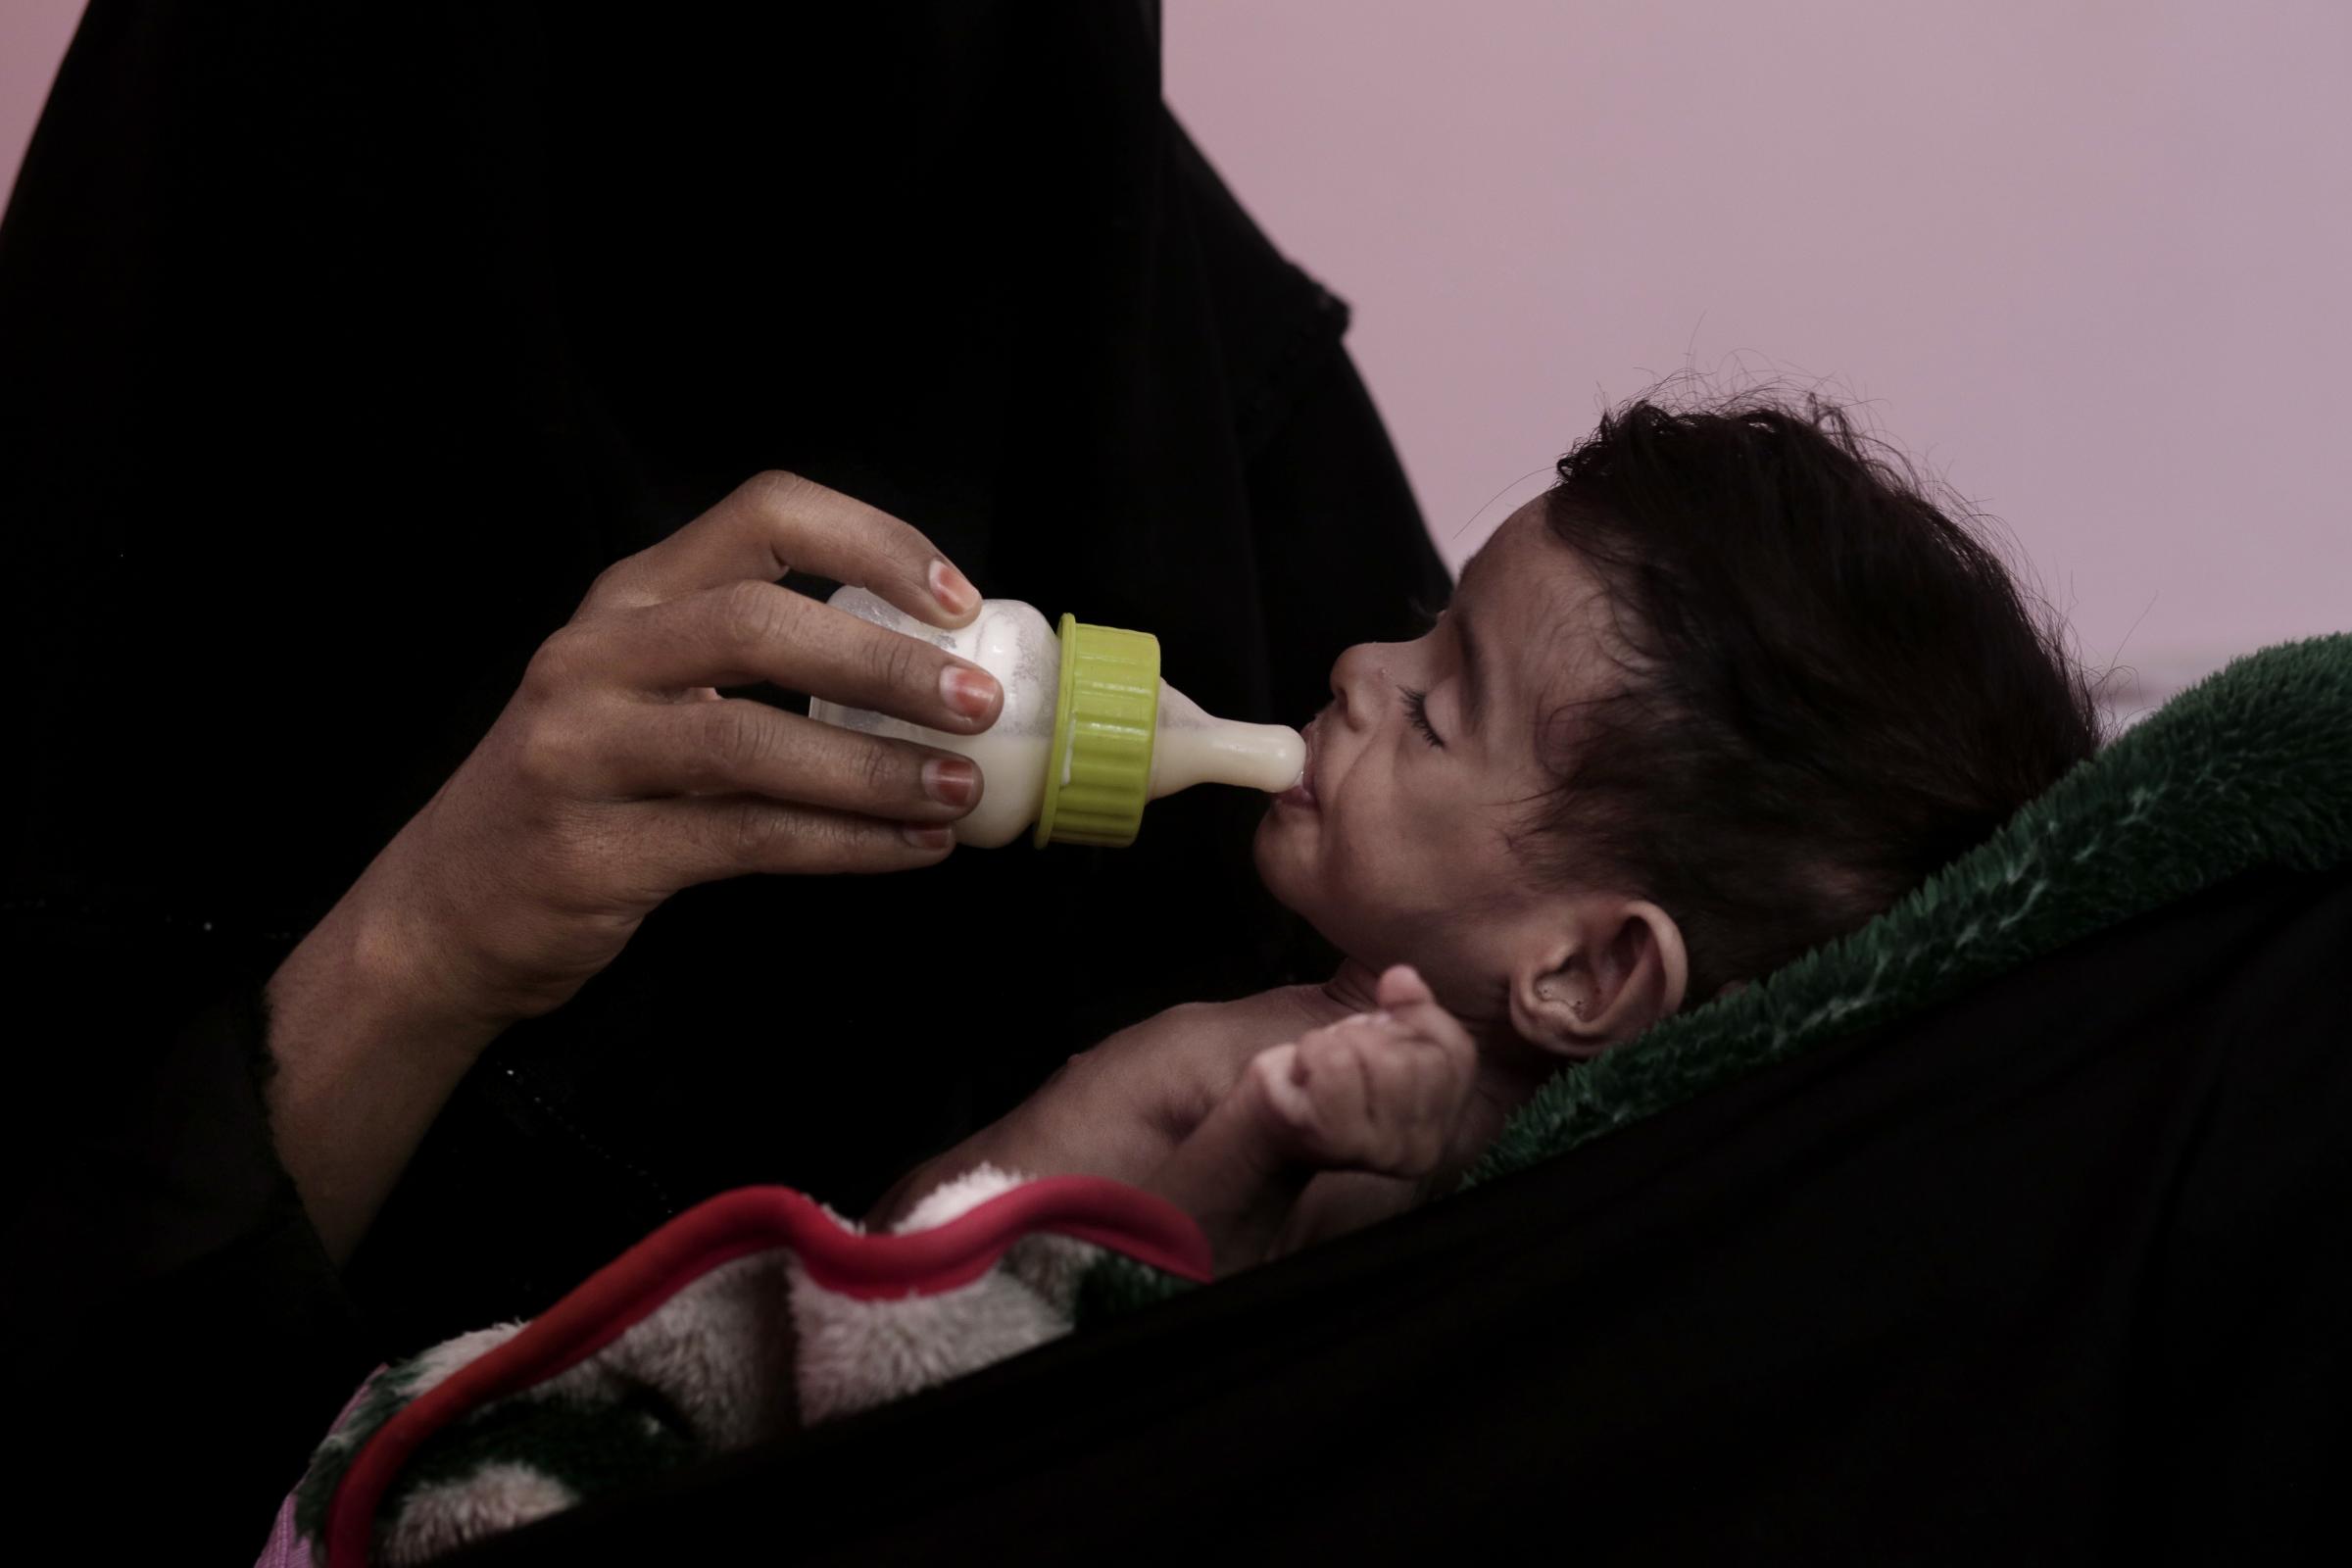 Starving Yemen mothers skip meals to save their children -  Ahmed Rashid Mokbel   Age: 7 months   Weight: 3.3 kg 